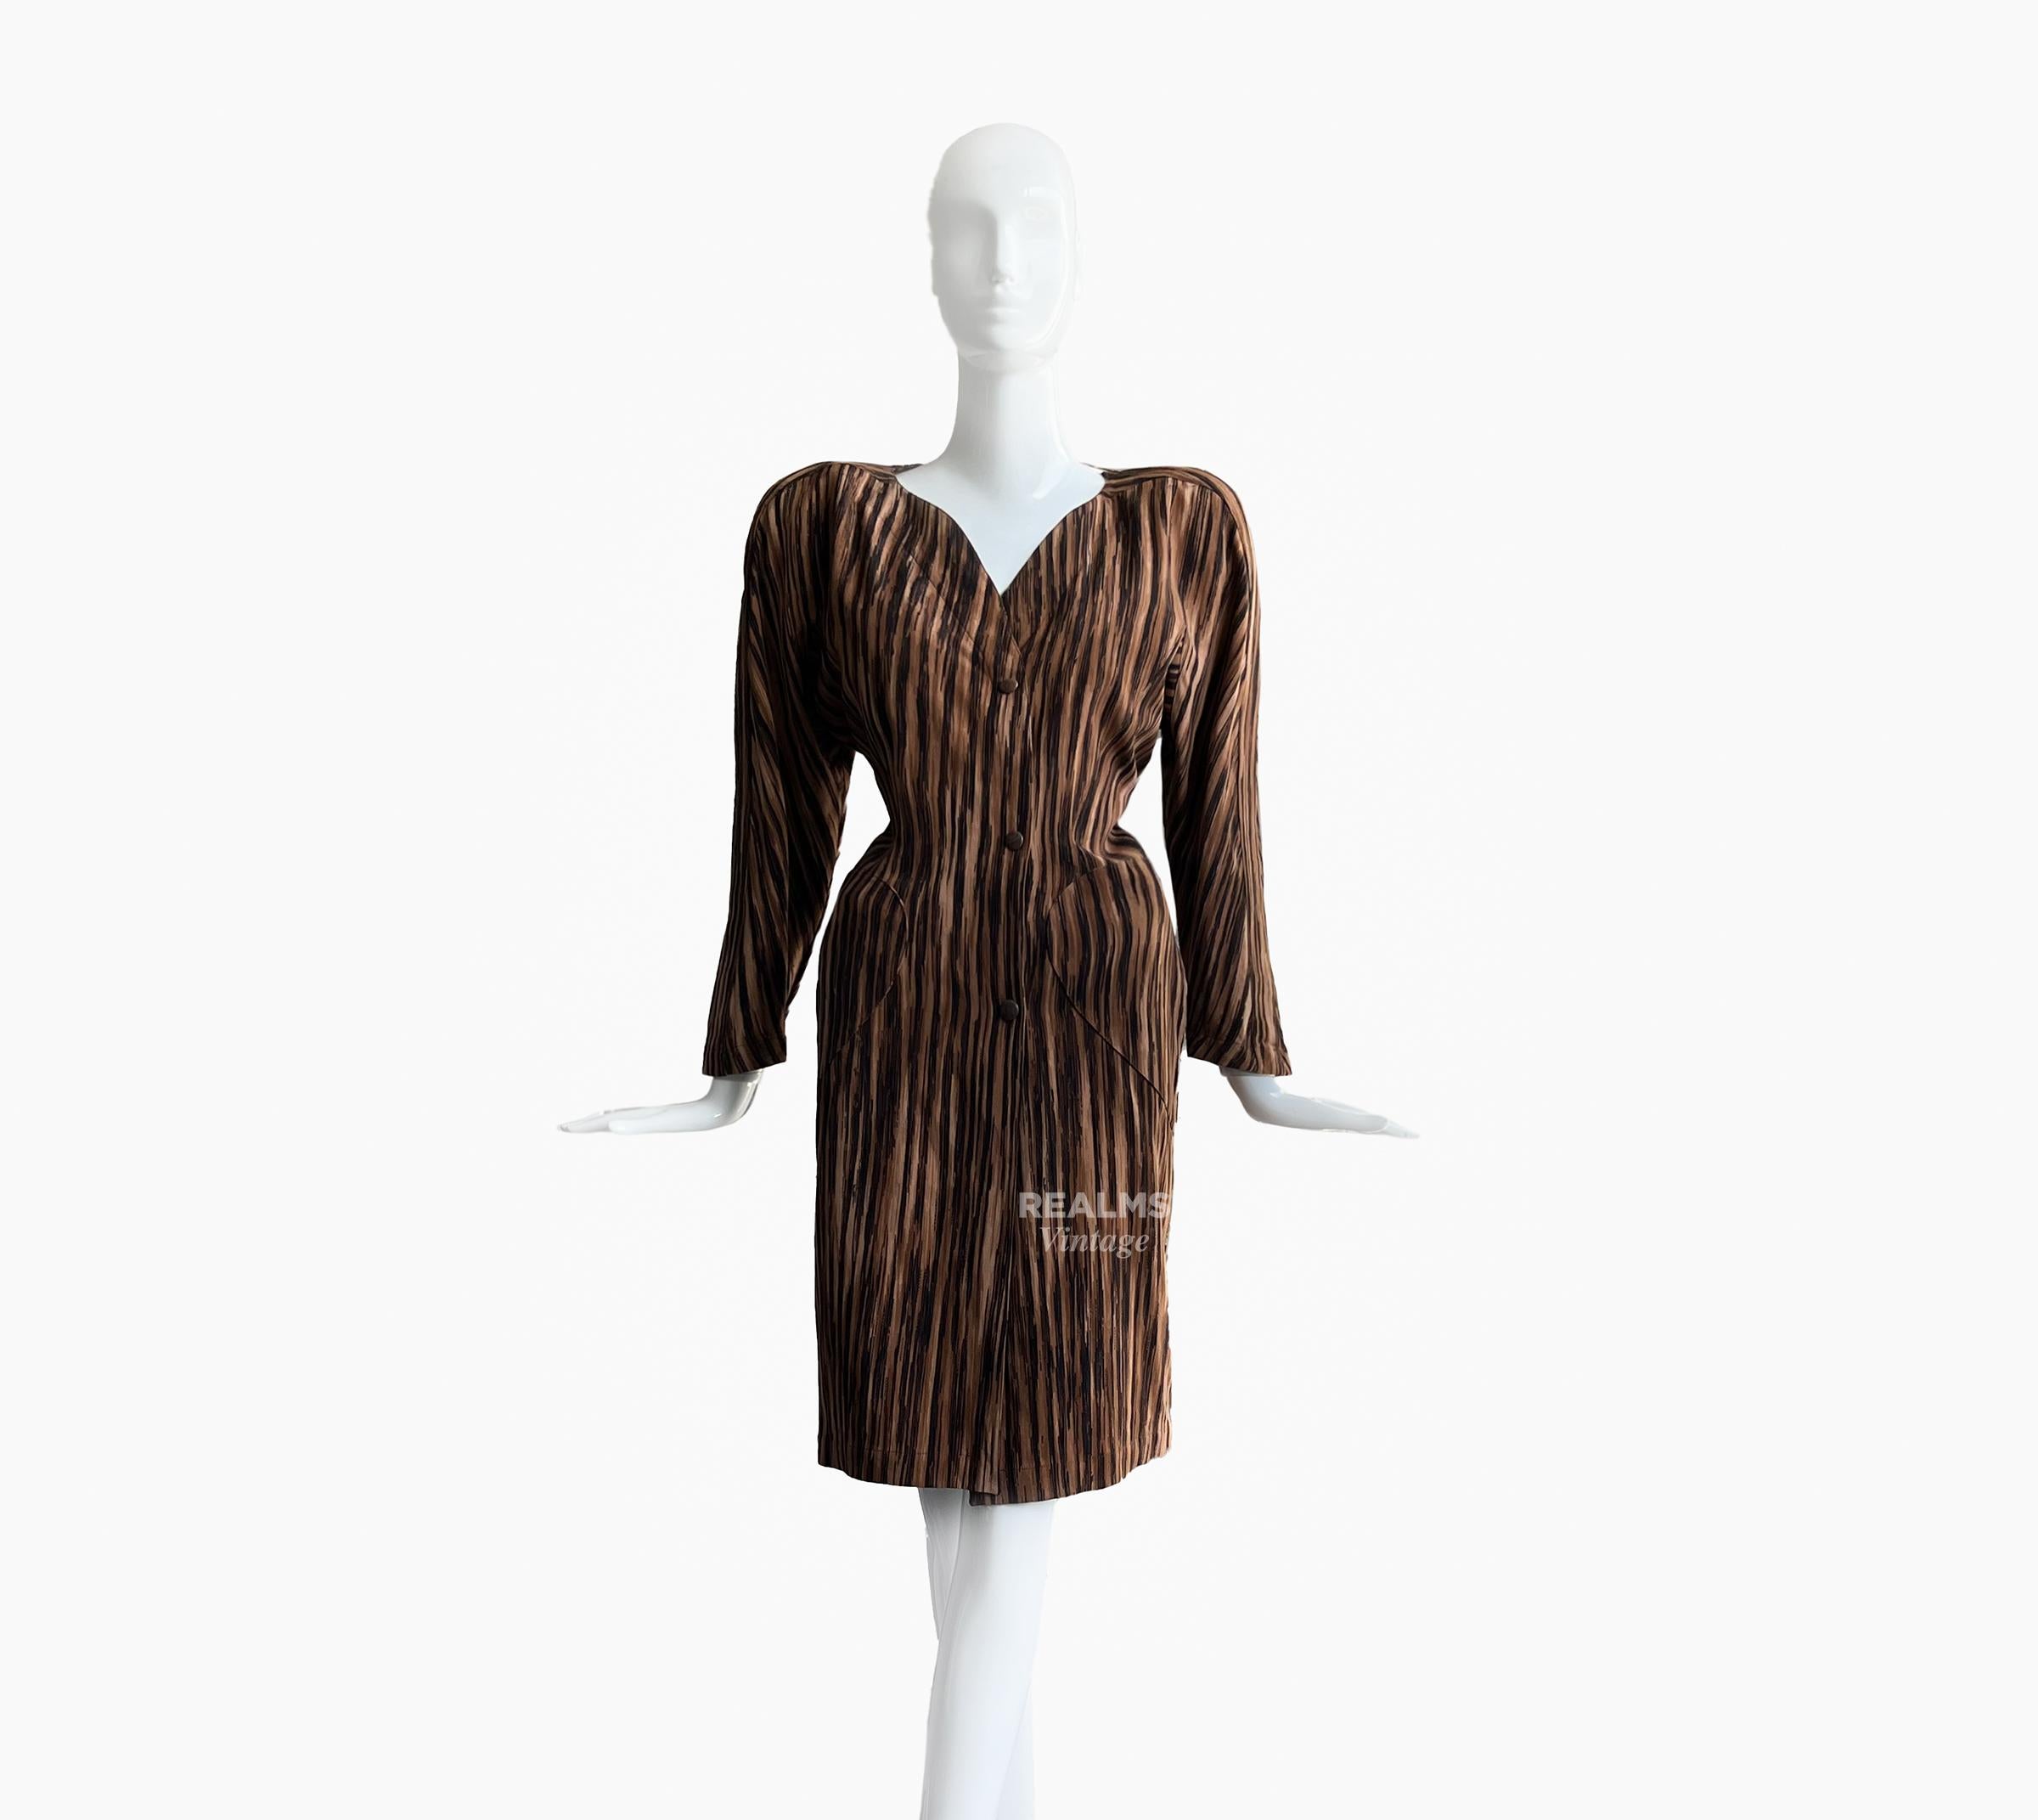 Rare Thierry Mugler SS 1988 Iconic African Collection Sculptural Dress For Sale 3